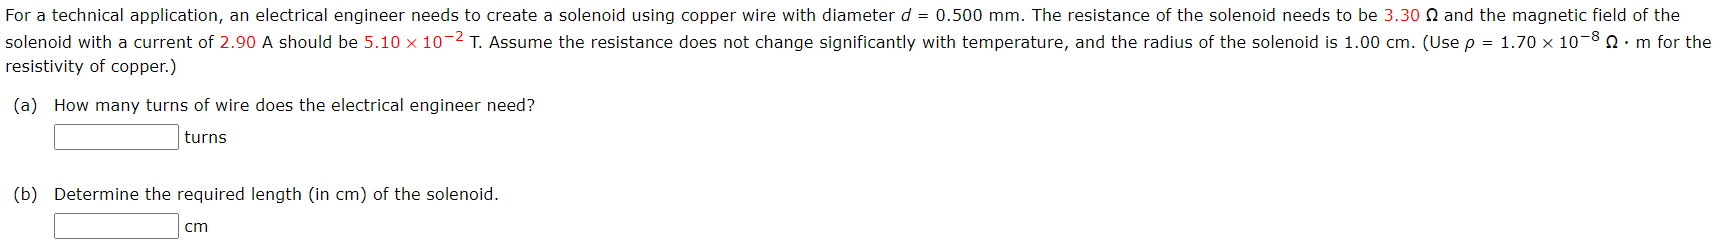 For a technical application, an electrical engineer needs to create a solenoid using copper wire with diameter d = 0.500 mm. The resistance of the solenoid needs to be 3.30 N and the magnetic field of the
solenoid with a current of 2.90 A should be 5.10 × 10-2 T. Assume the resistance does not change significantly with temperature, and the radius of the solenoid is 1.00 cm. (Use p = 1.70 x 10-8 n:m for the
resistivity of copper.)
(a) How many turns of wire does the electrical engineer need?
turns
(b) Determine the required length (in cm) of the solenoid.
cm
